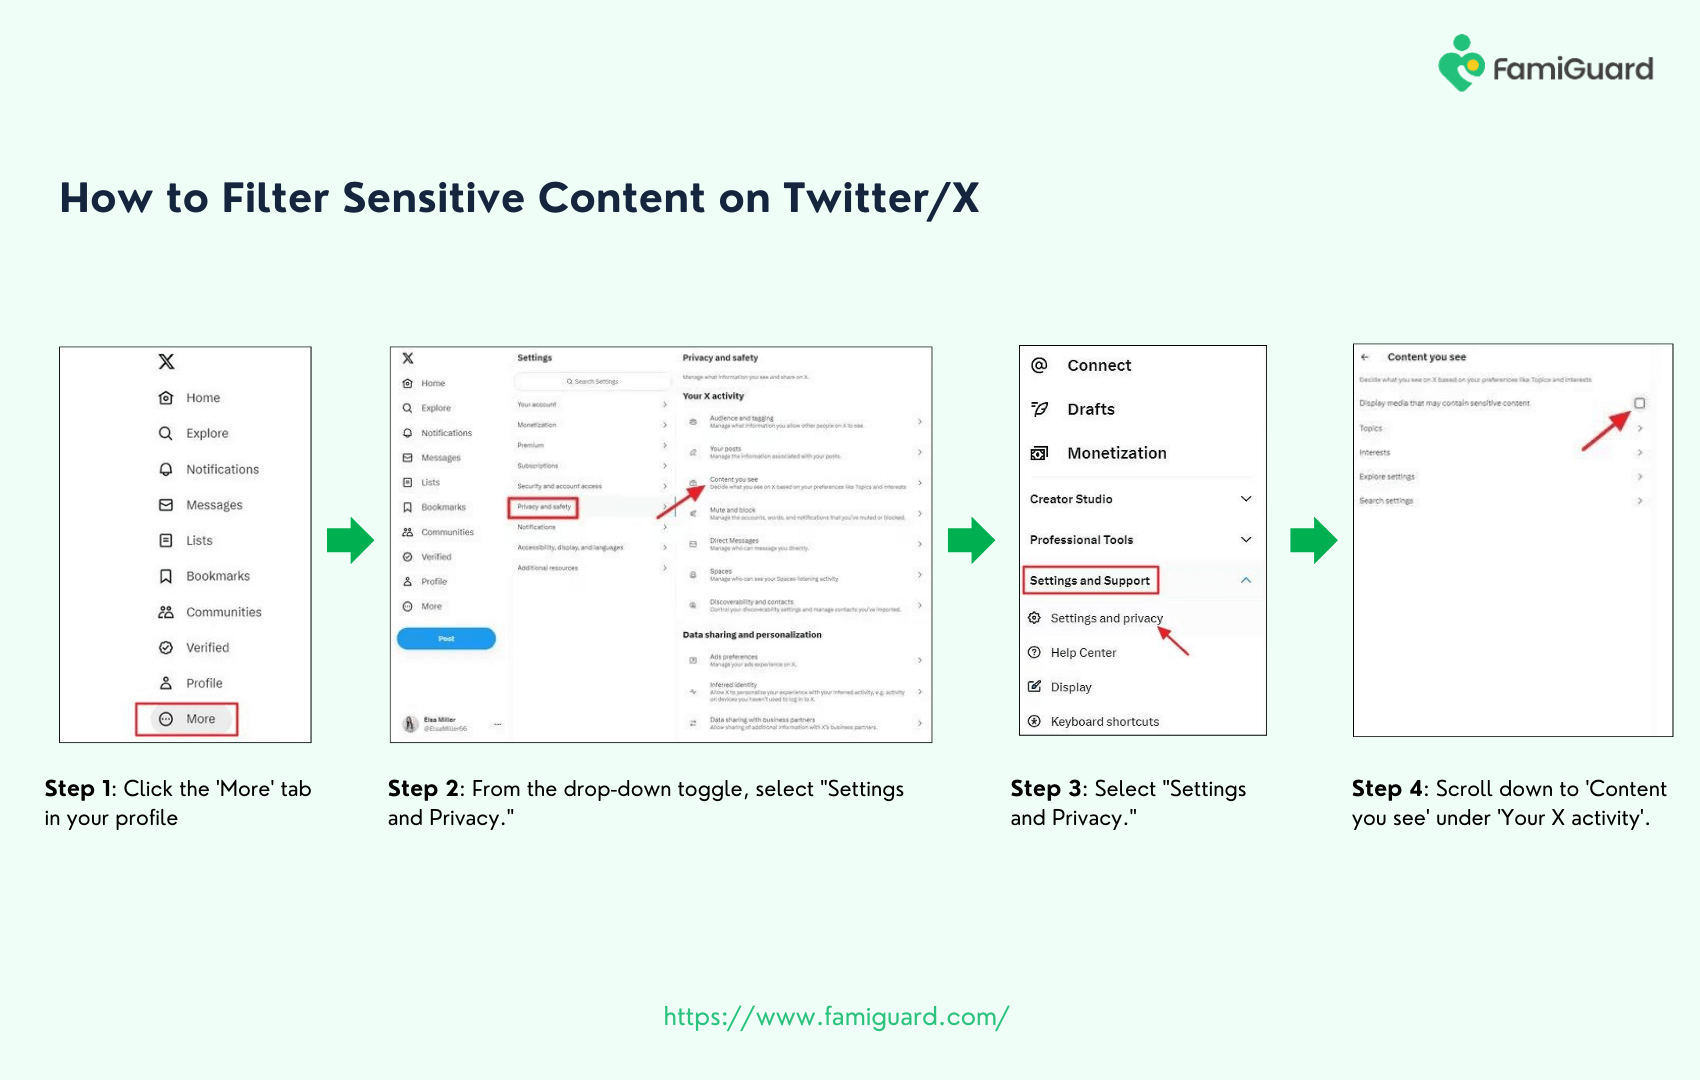 How to Filter Sensitive
    Content on Twitter or X